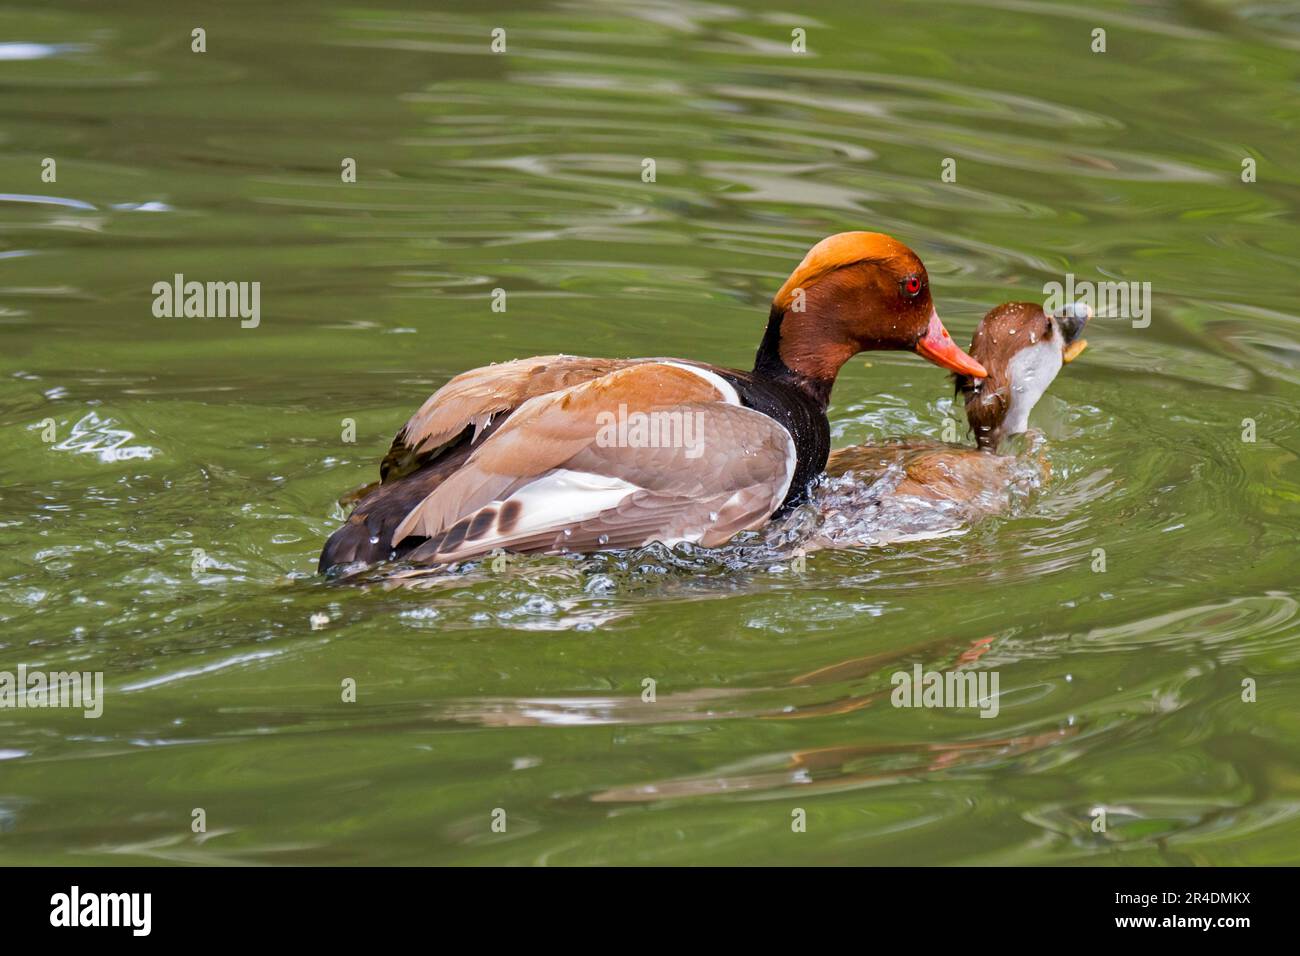 Red-crested pochard (Netta rufina) male mating / copulating with female in water of pond in spring Stock Photo